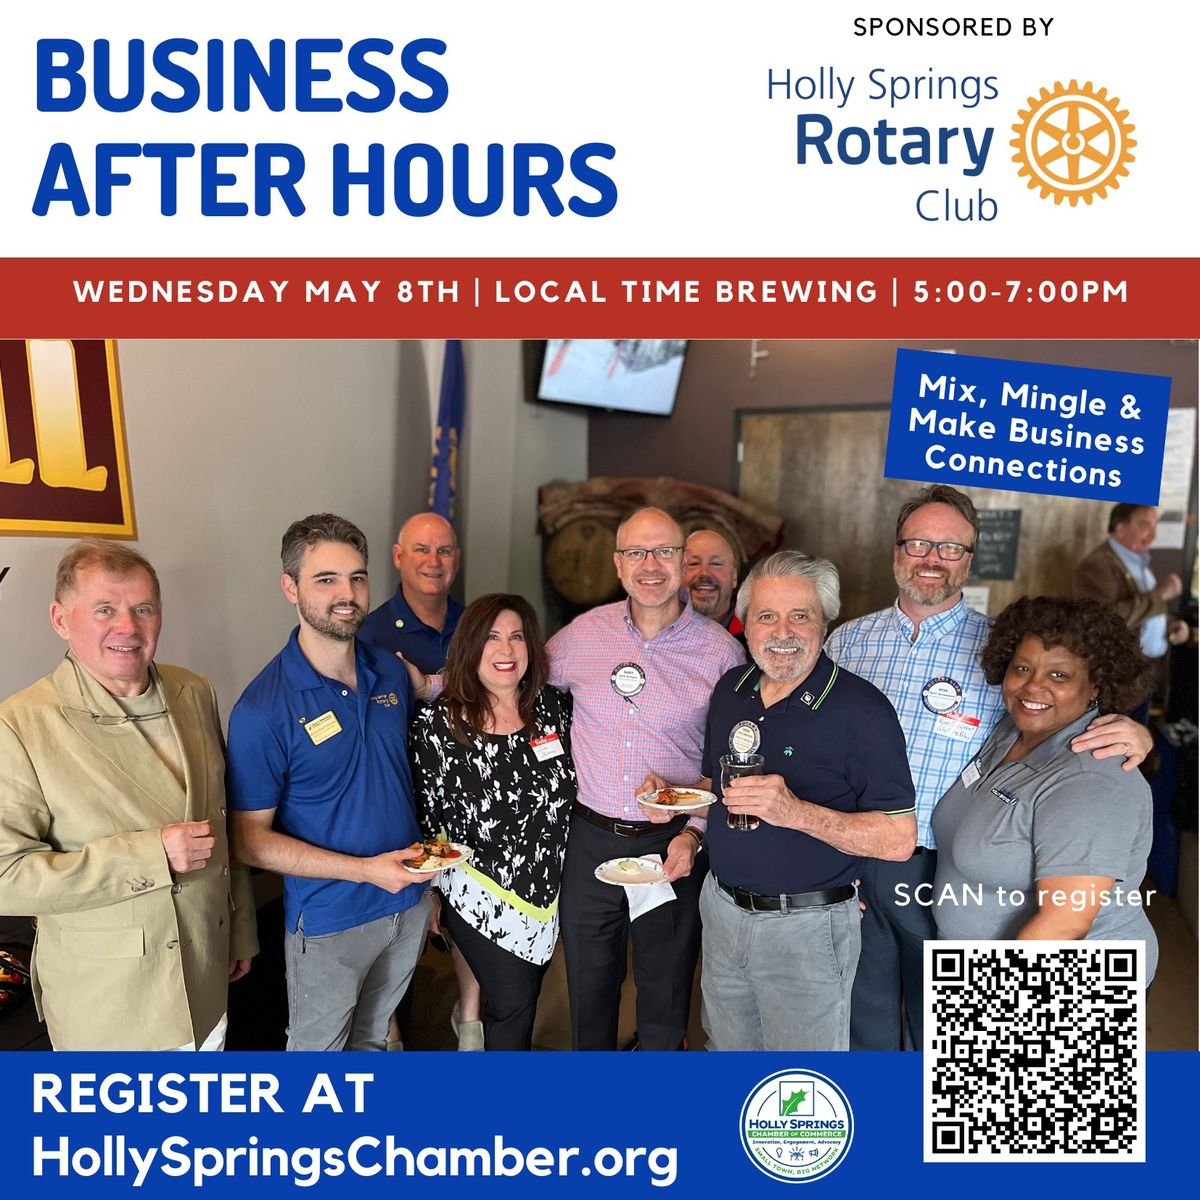 Business After Hours Sponsored by Holly Springs Rotary Club